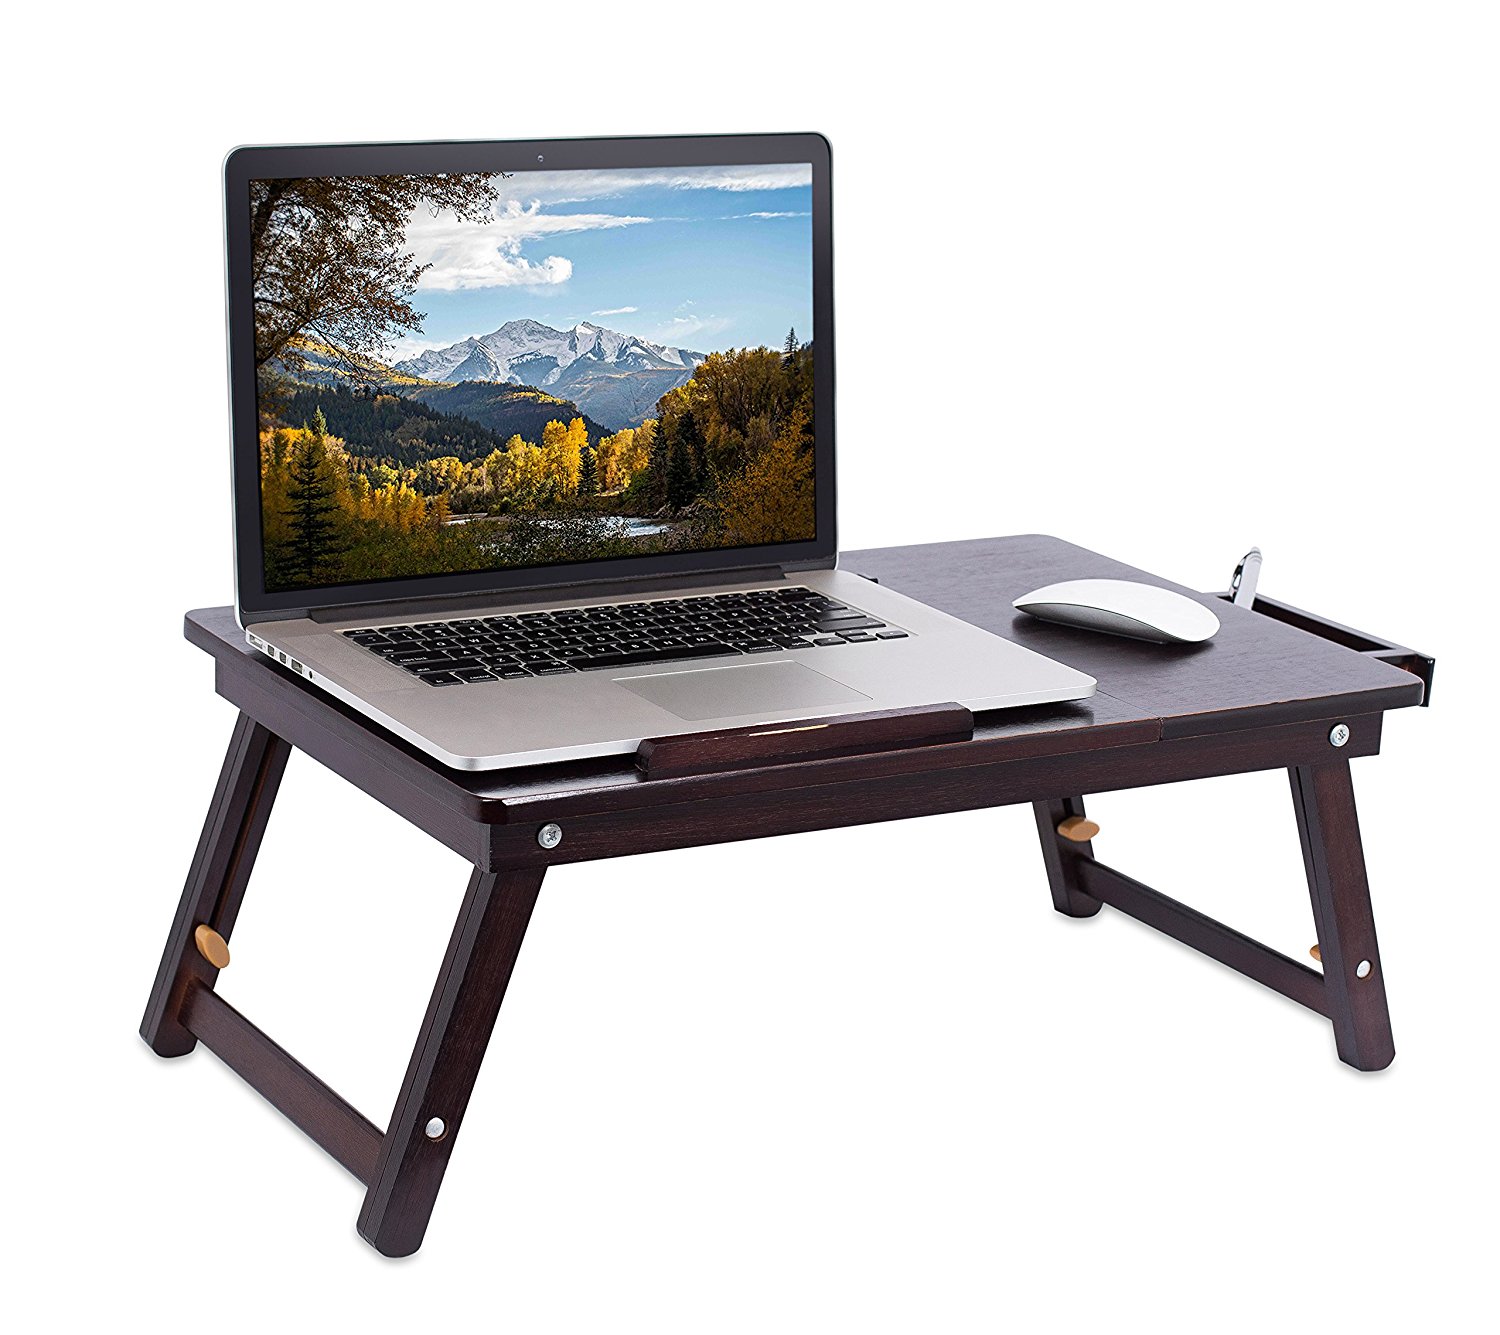 Zimtown Portable Bamboo Folding Laptop Desk Table Breakfast Serving Bed Tray Adjustable Leg - image 1 of 9